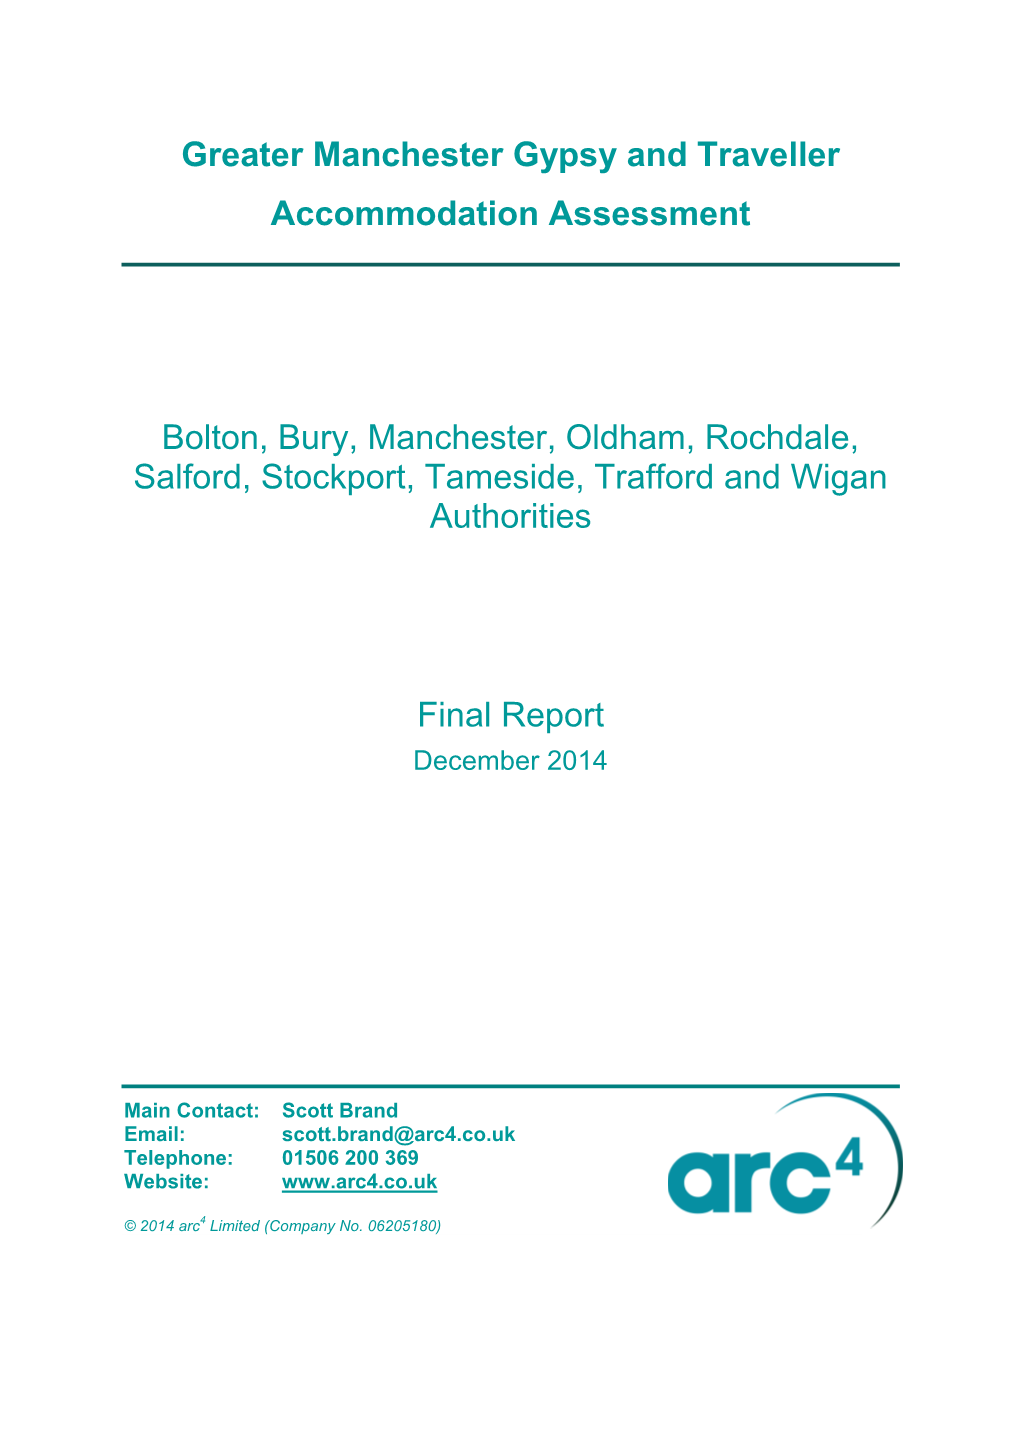 Greater Manchester Gypsy and Traveller Accommodation Assessment